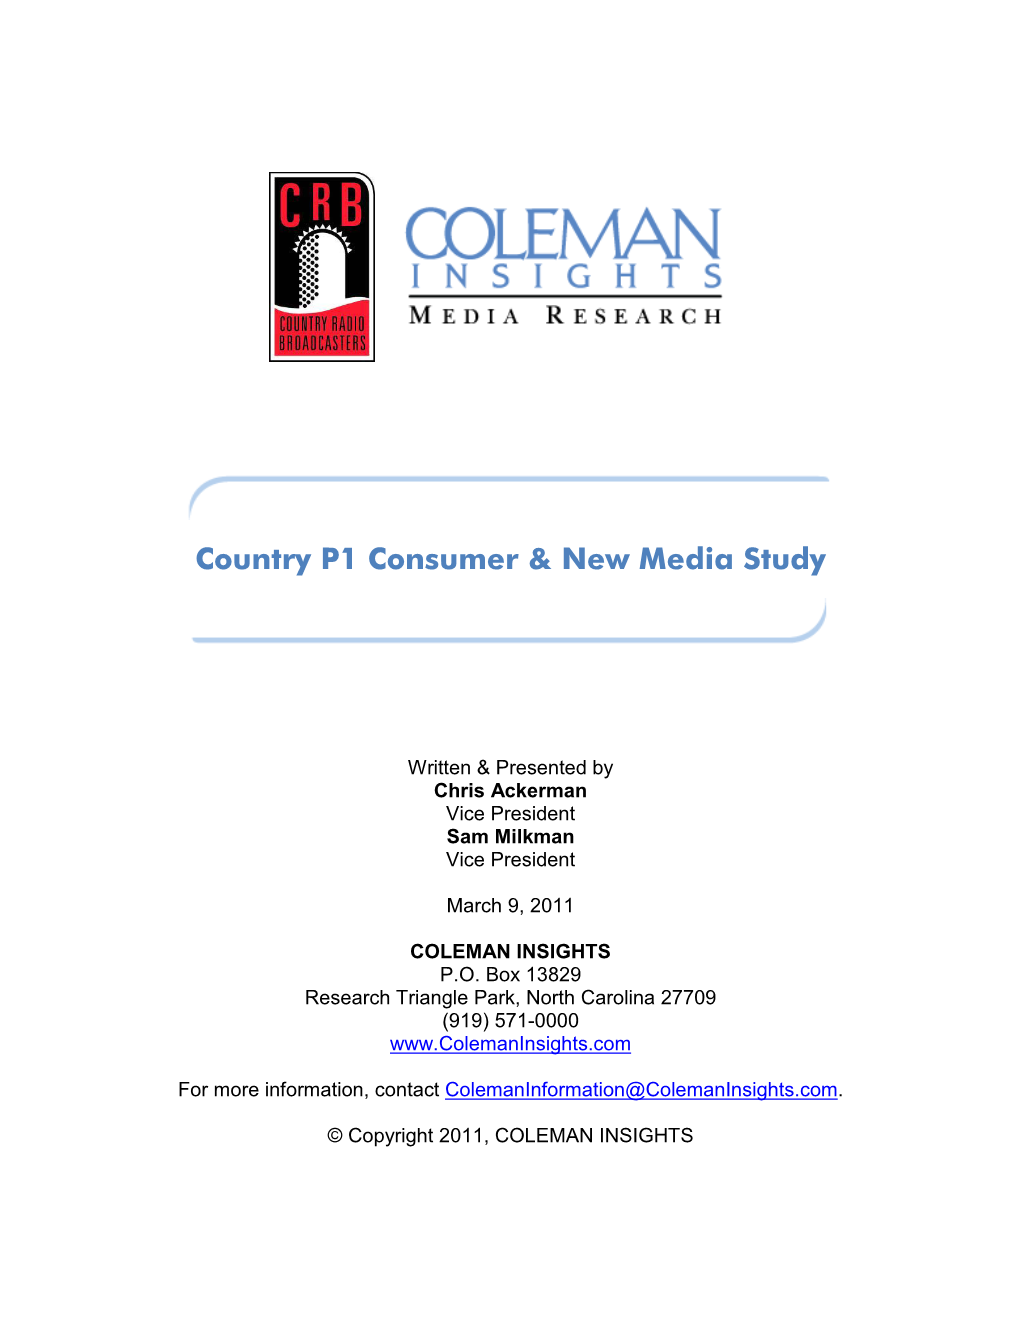 Coleman Insights CRS 2011 Country P1 Consumer & New Media Study